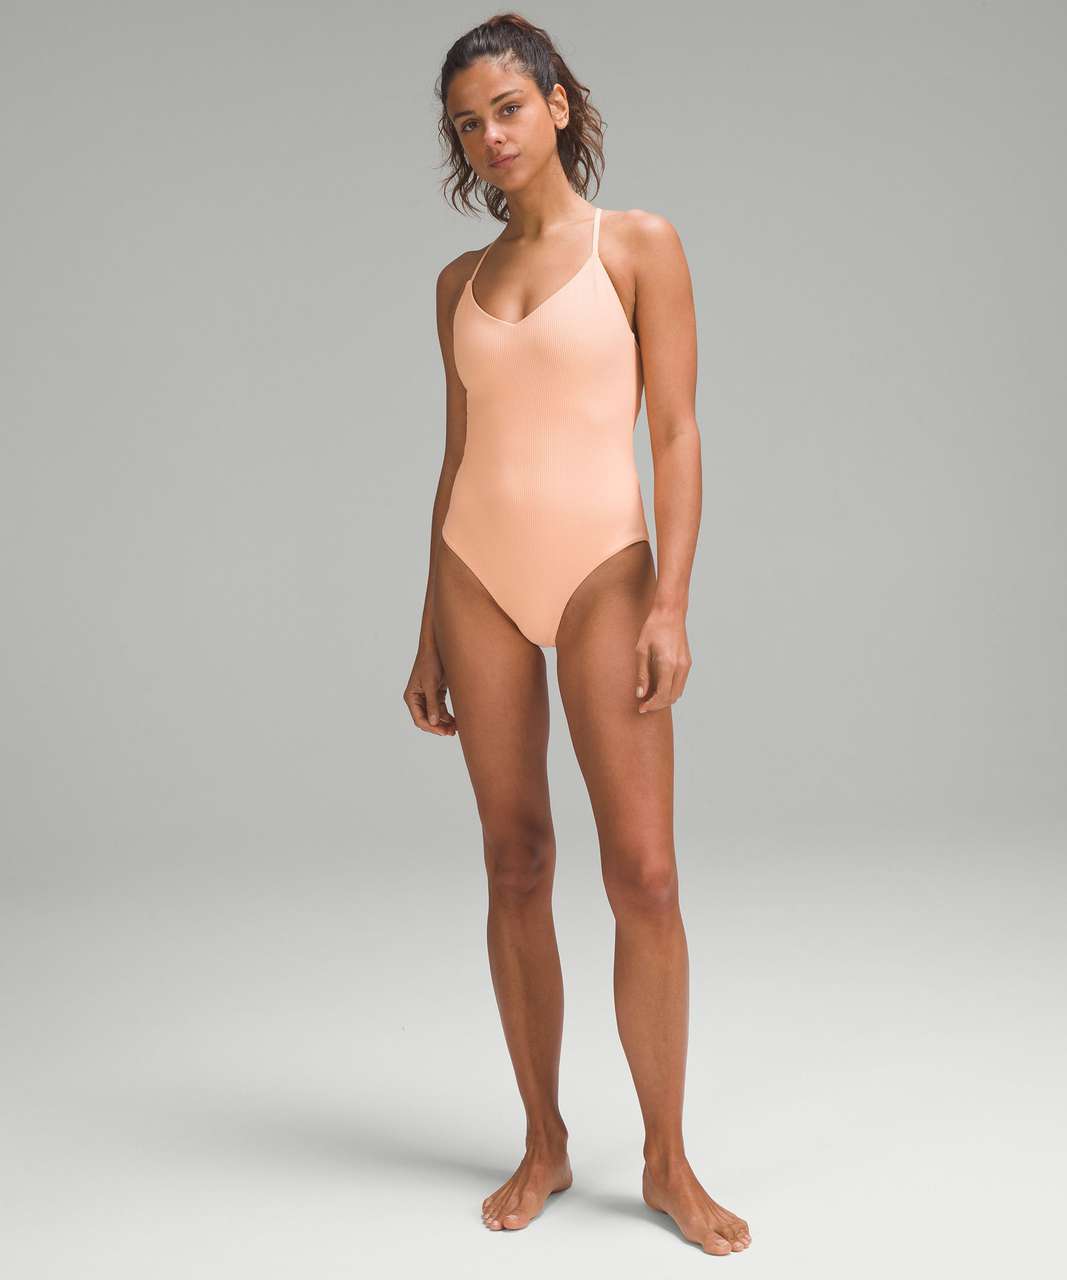 Waterside V-Neck Skimpy-Fit One-Piece Swimsuit B/C Cup